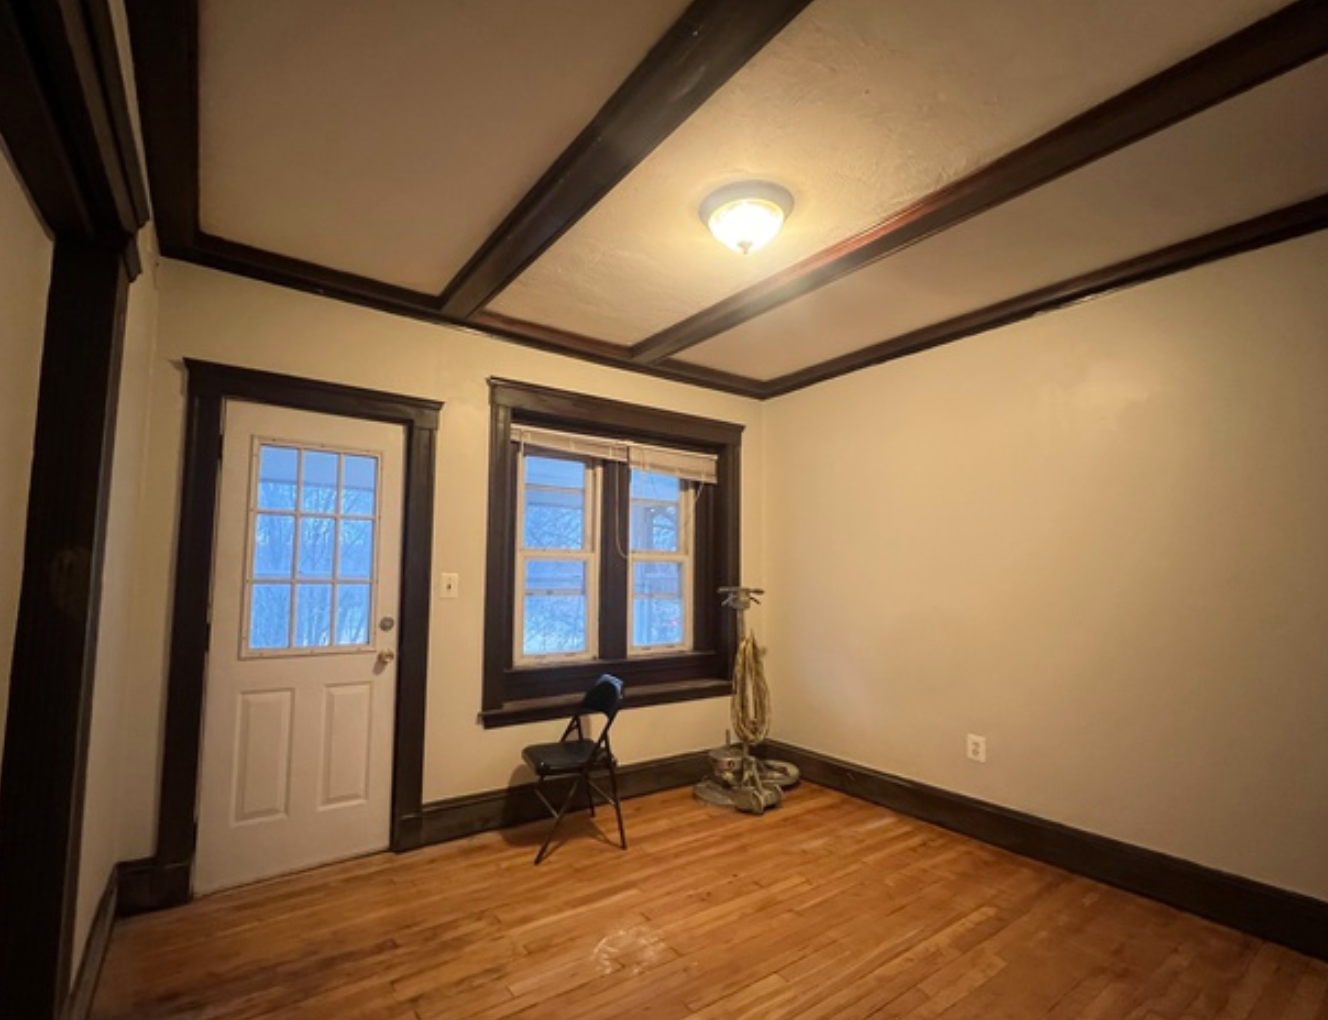 Photos of apartment on Alewife Brook Pkwy.,Somerville MA 02144